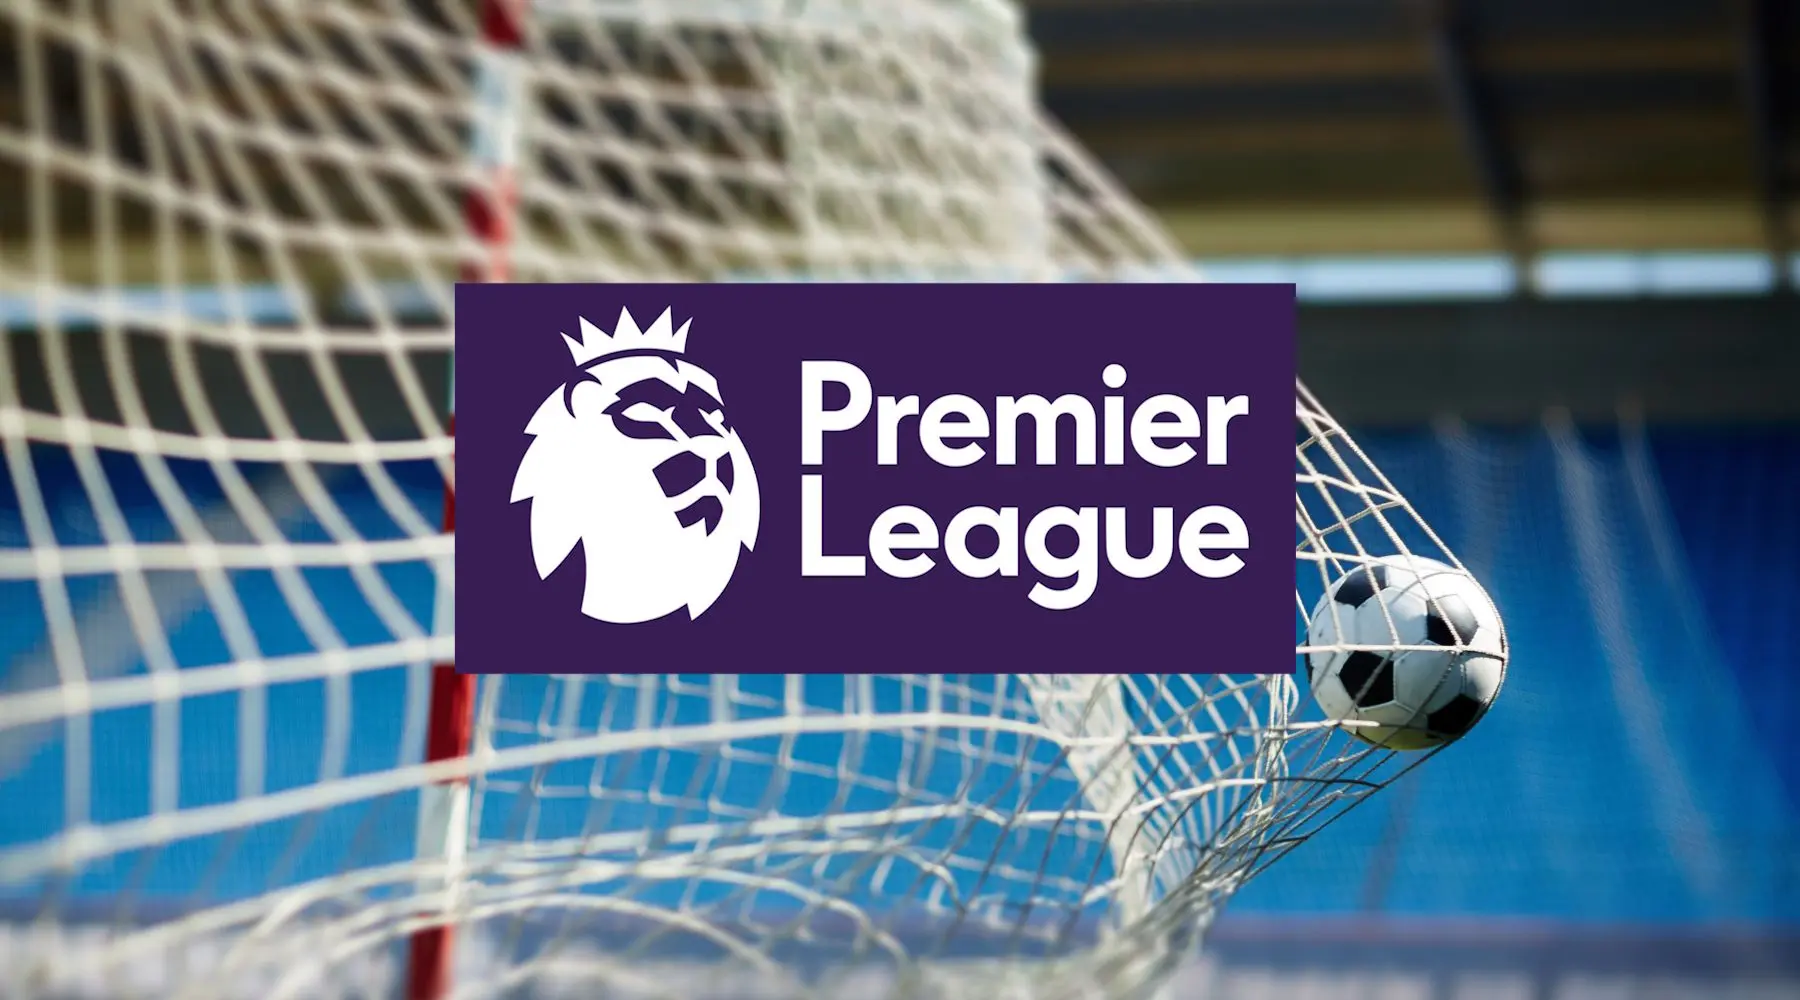 How to watch English Premier League (EPL) games live in Australia